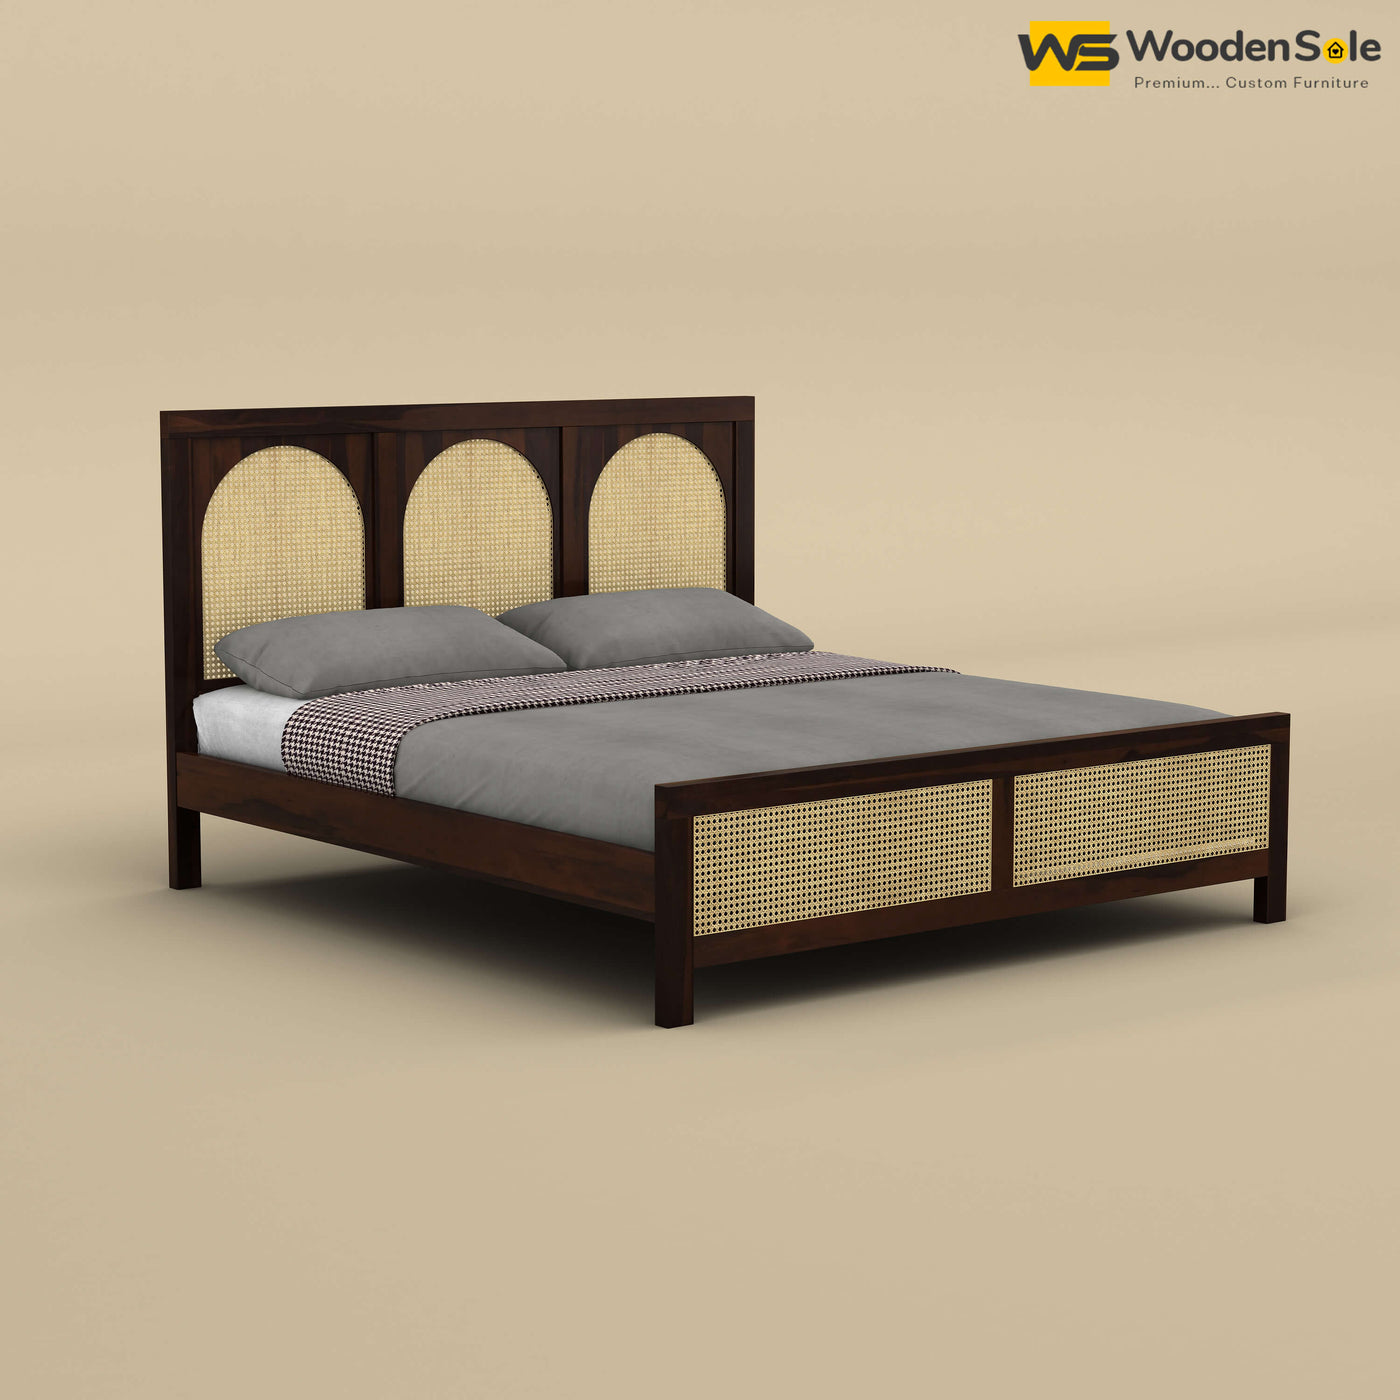 Wooden Rattan Cane Bed (King Size, Walnut Finish)